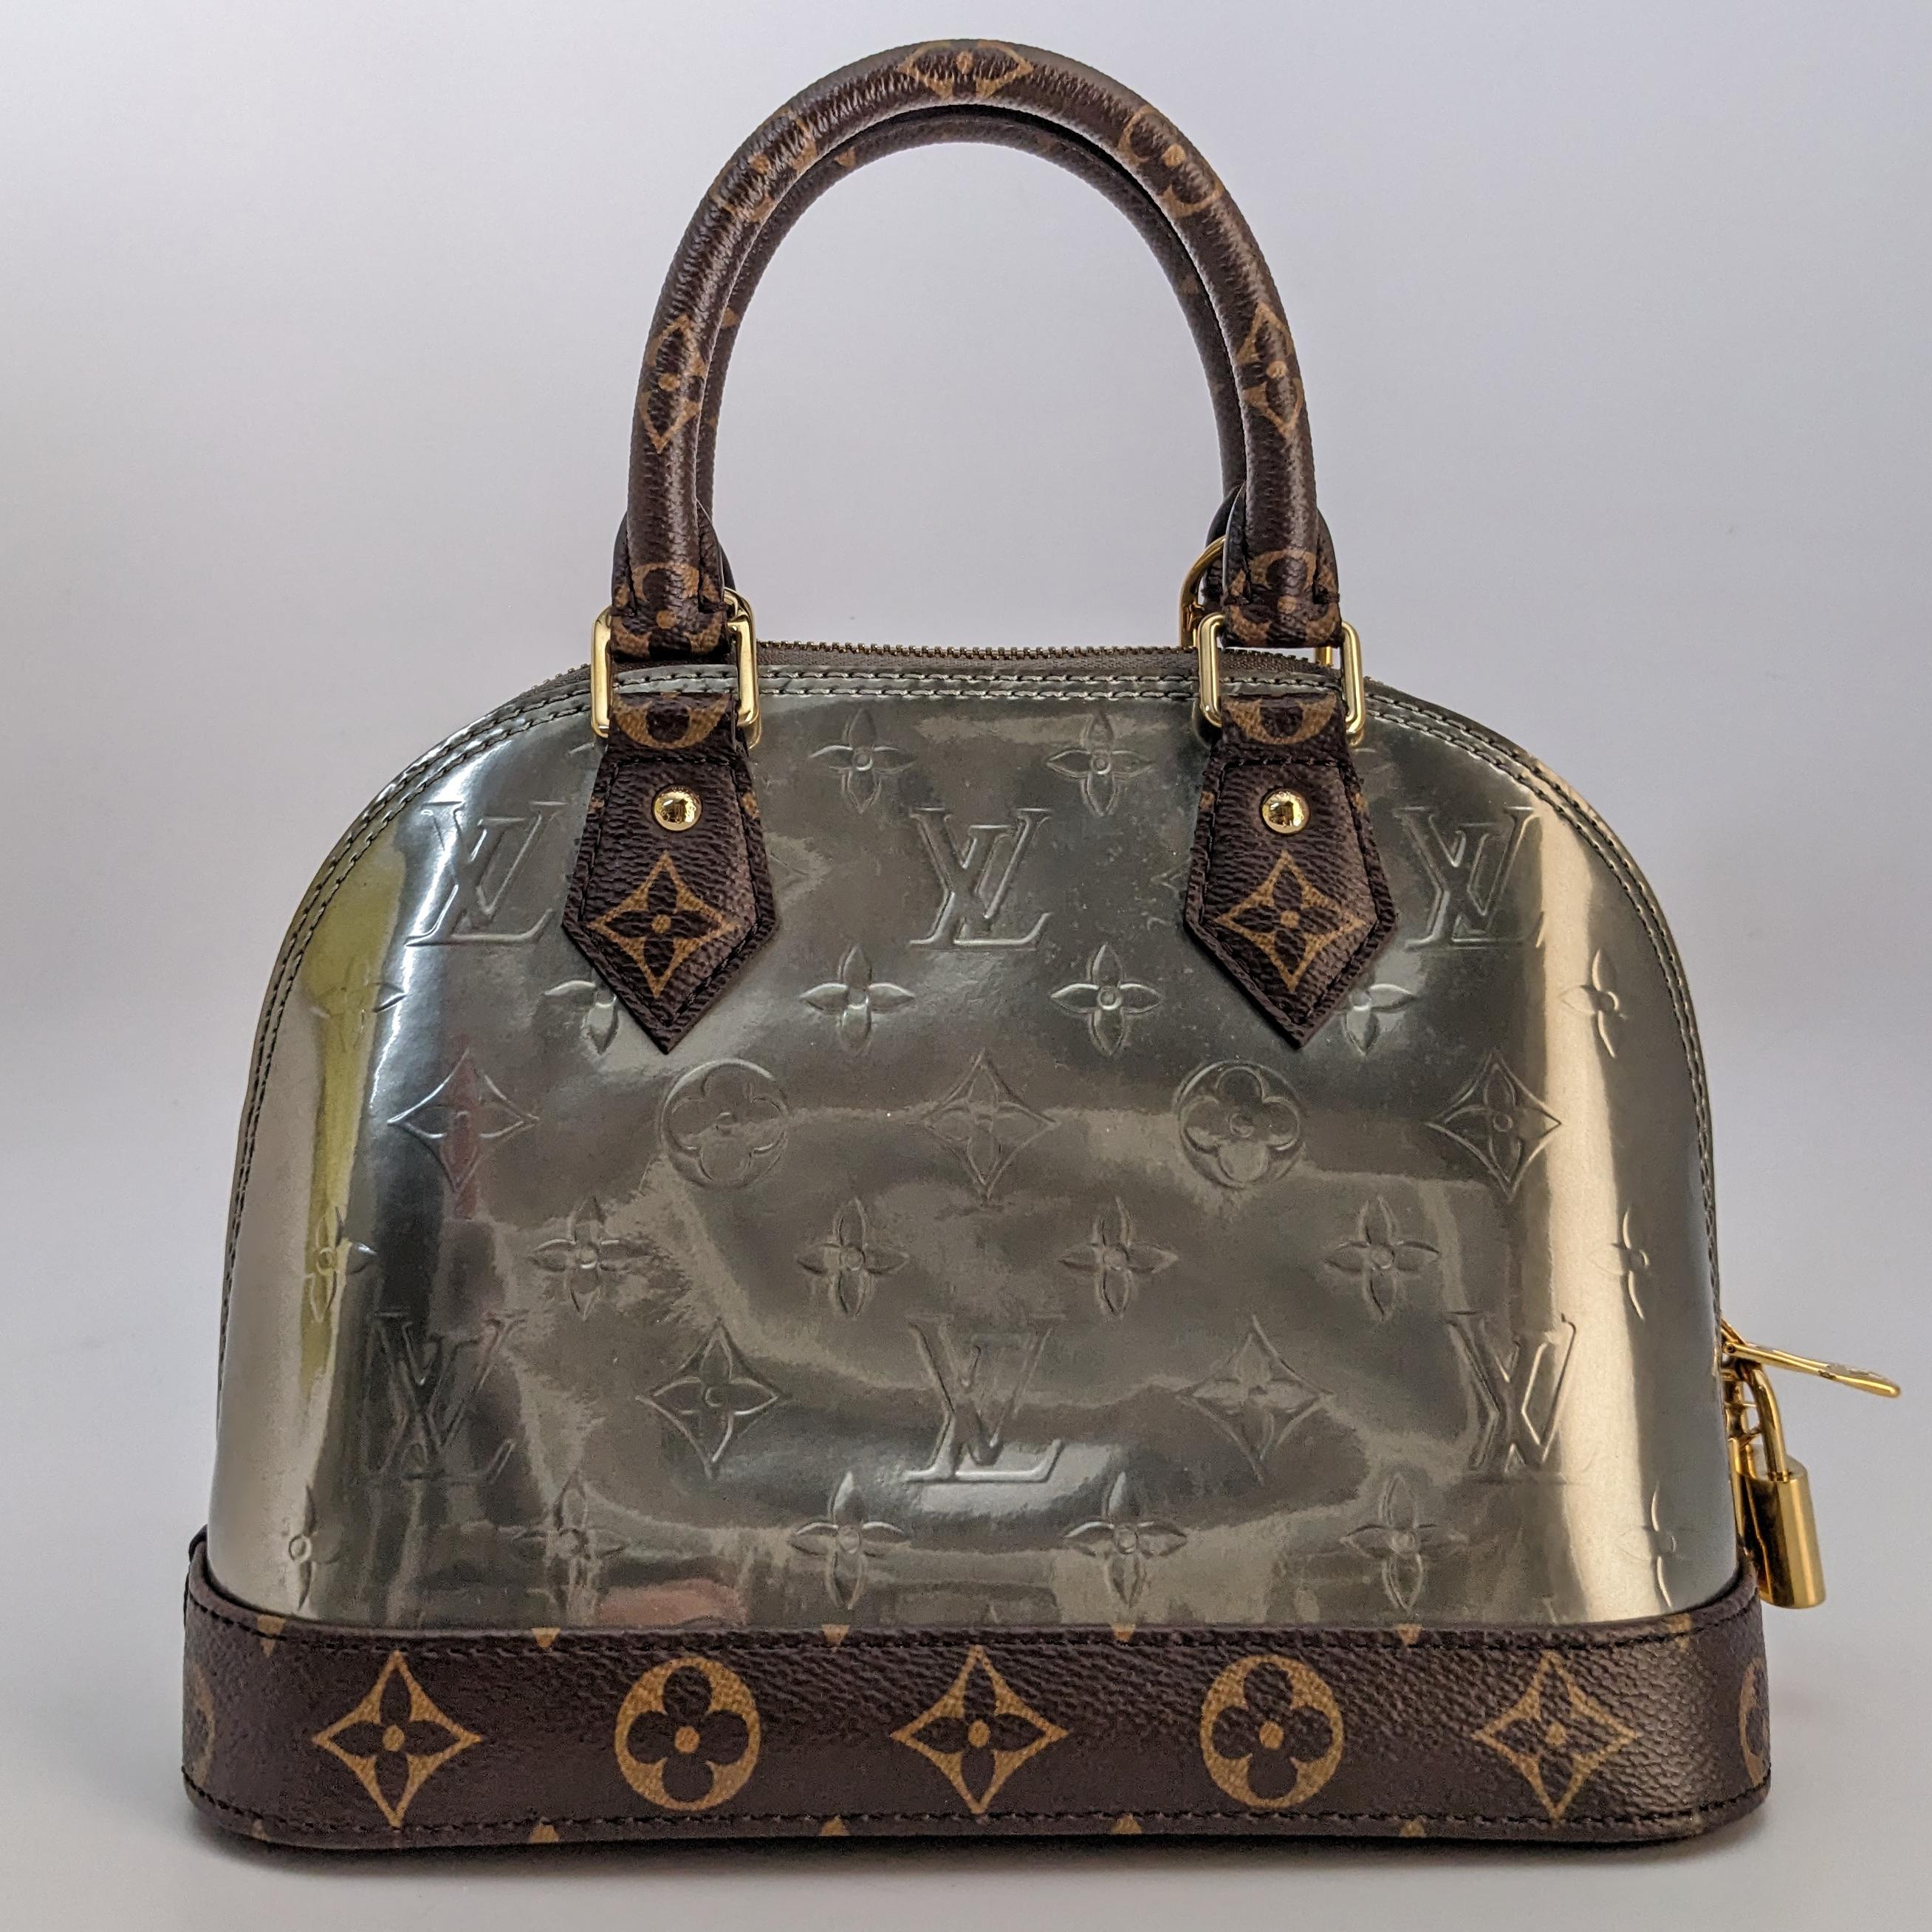 Condition: This authentic Louis Vuitton bag is in great pre-loved condition. There are light marks to the exterior and minor handle indents on front and back.

Includes: Clochette, long strap

Features: The bag features monogram coated canvas top